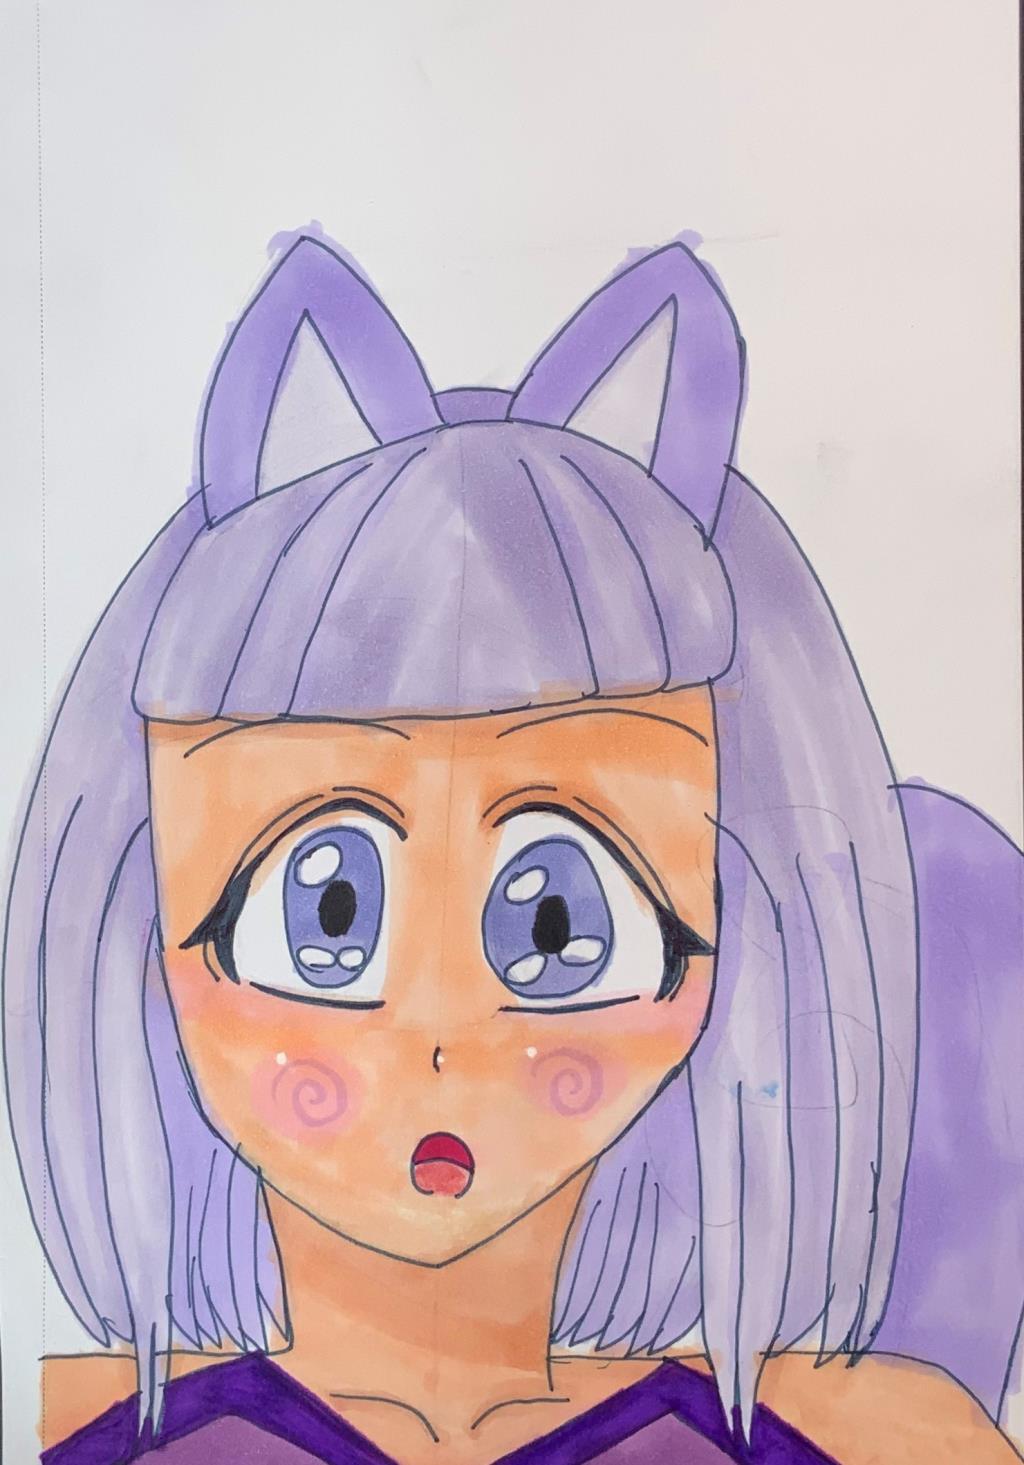 (age 9) "Sara lives in Costa Mesa with her family. She loves drawing anime-inspired people. Sara also loves experimenting with color and fashion."